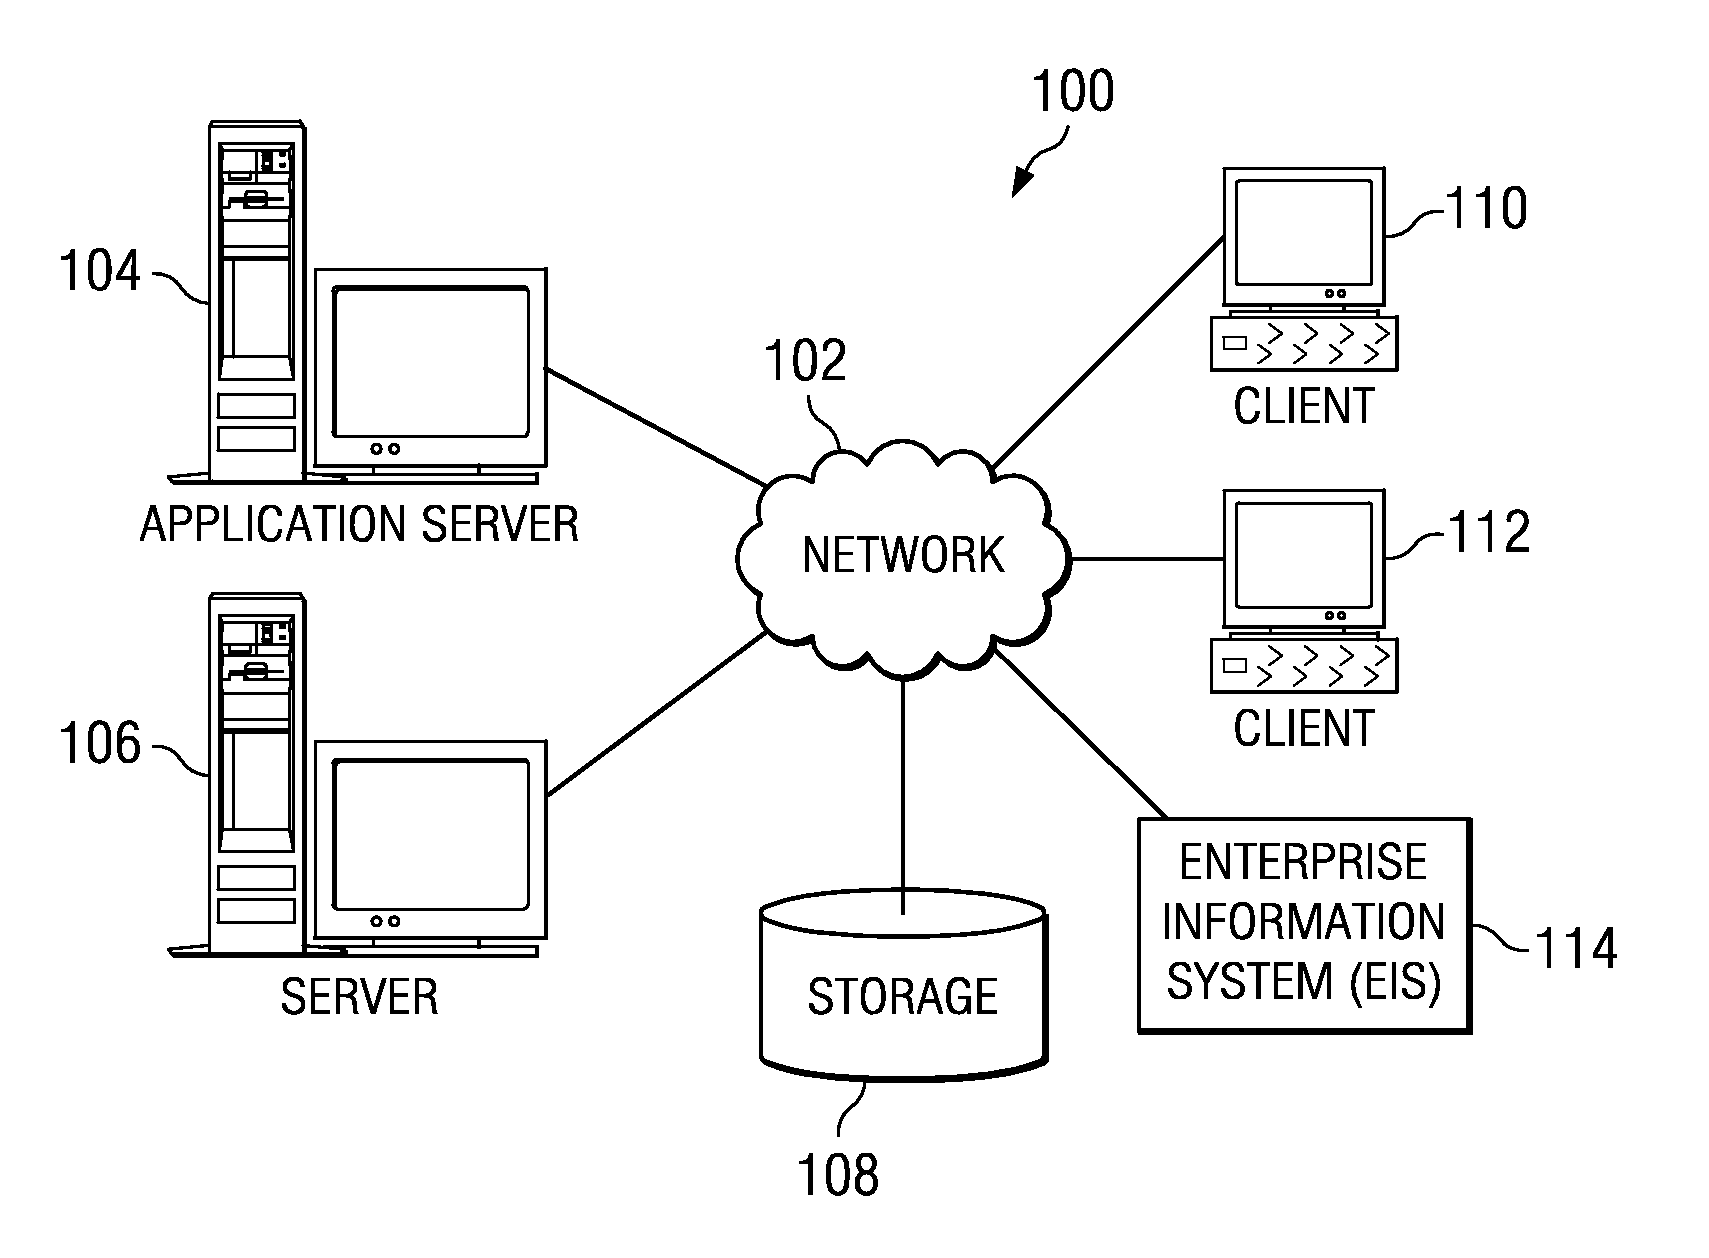 Extensible mechanism for automatically migrating resource adapter components in a development environment